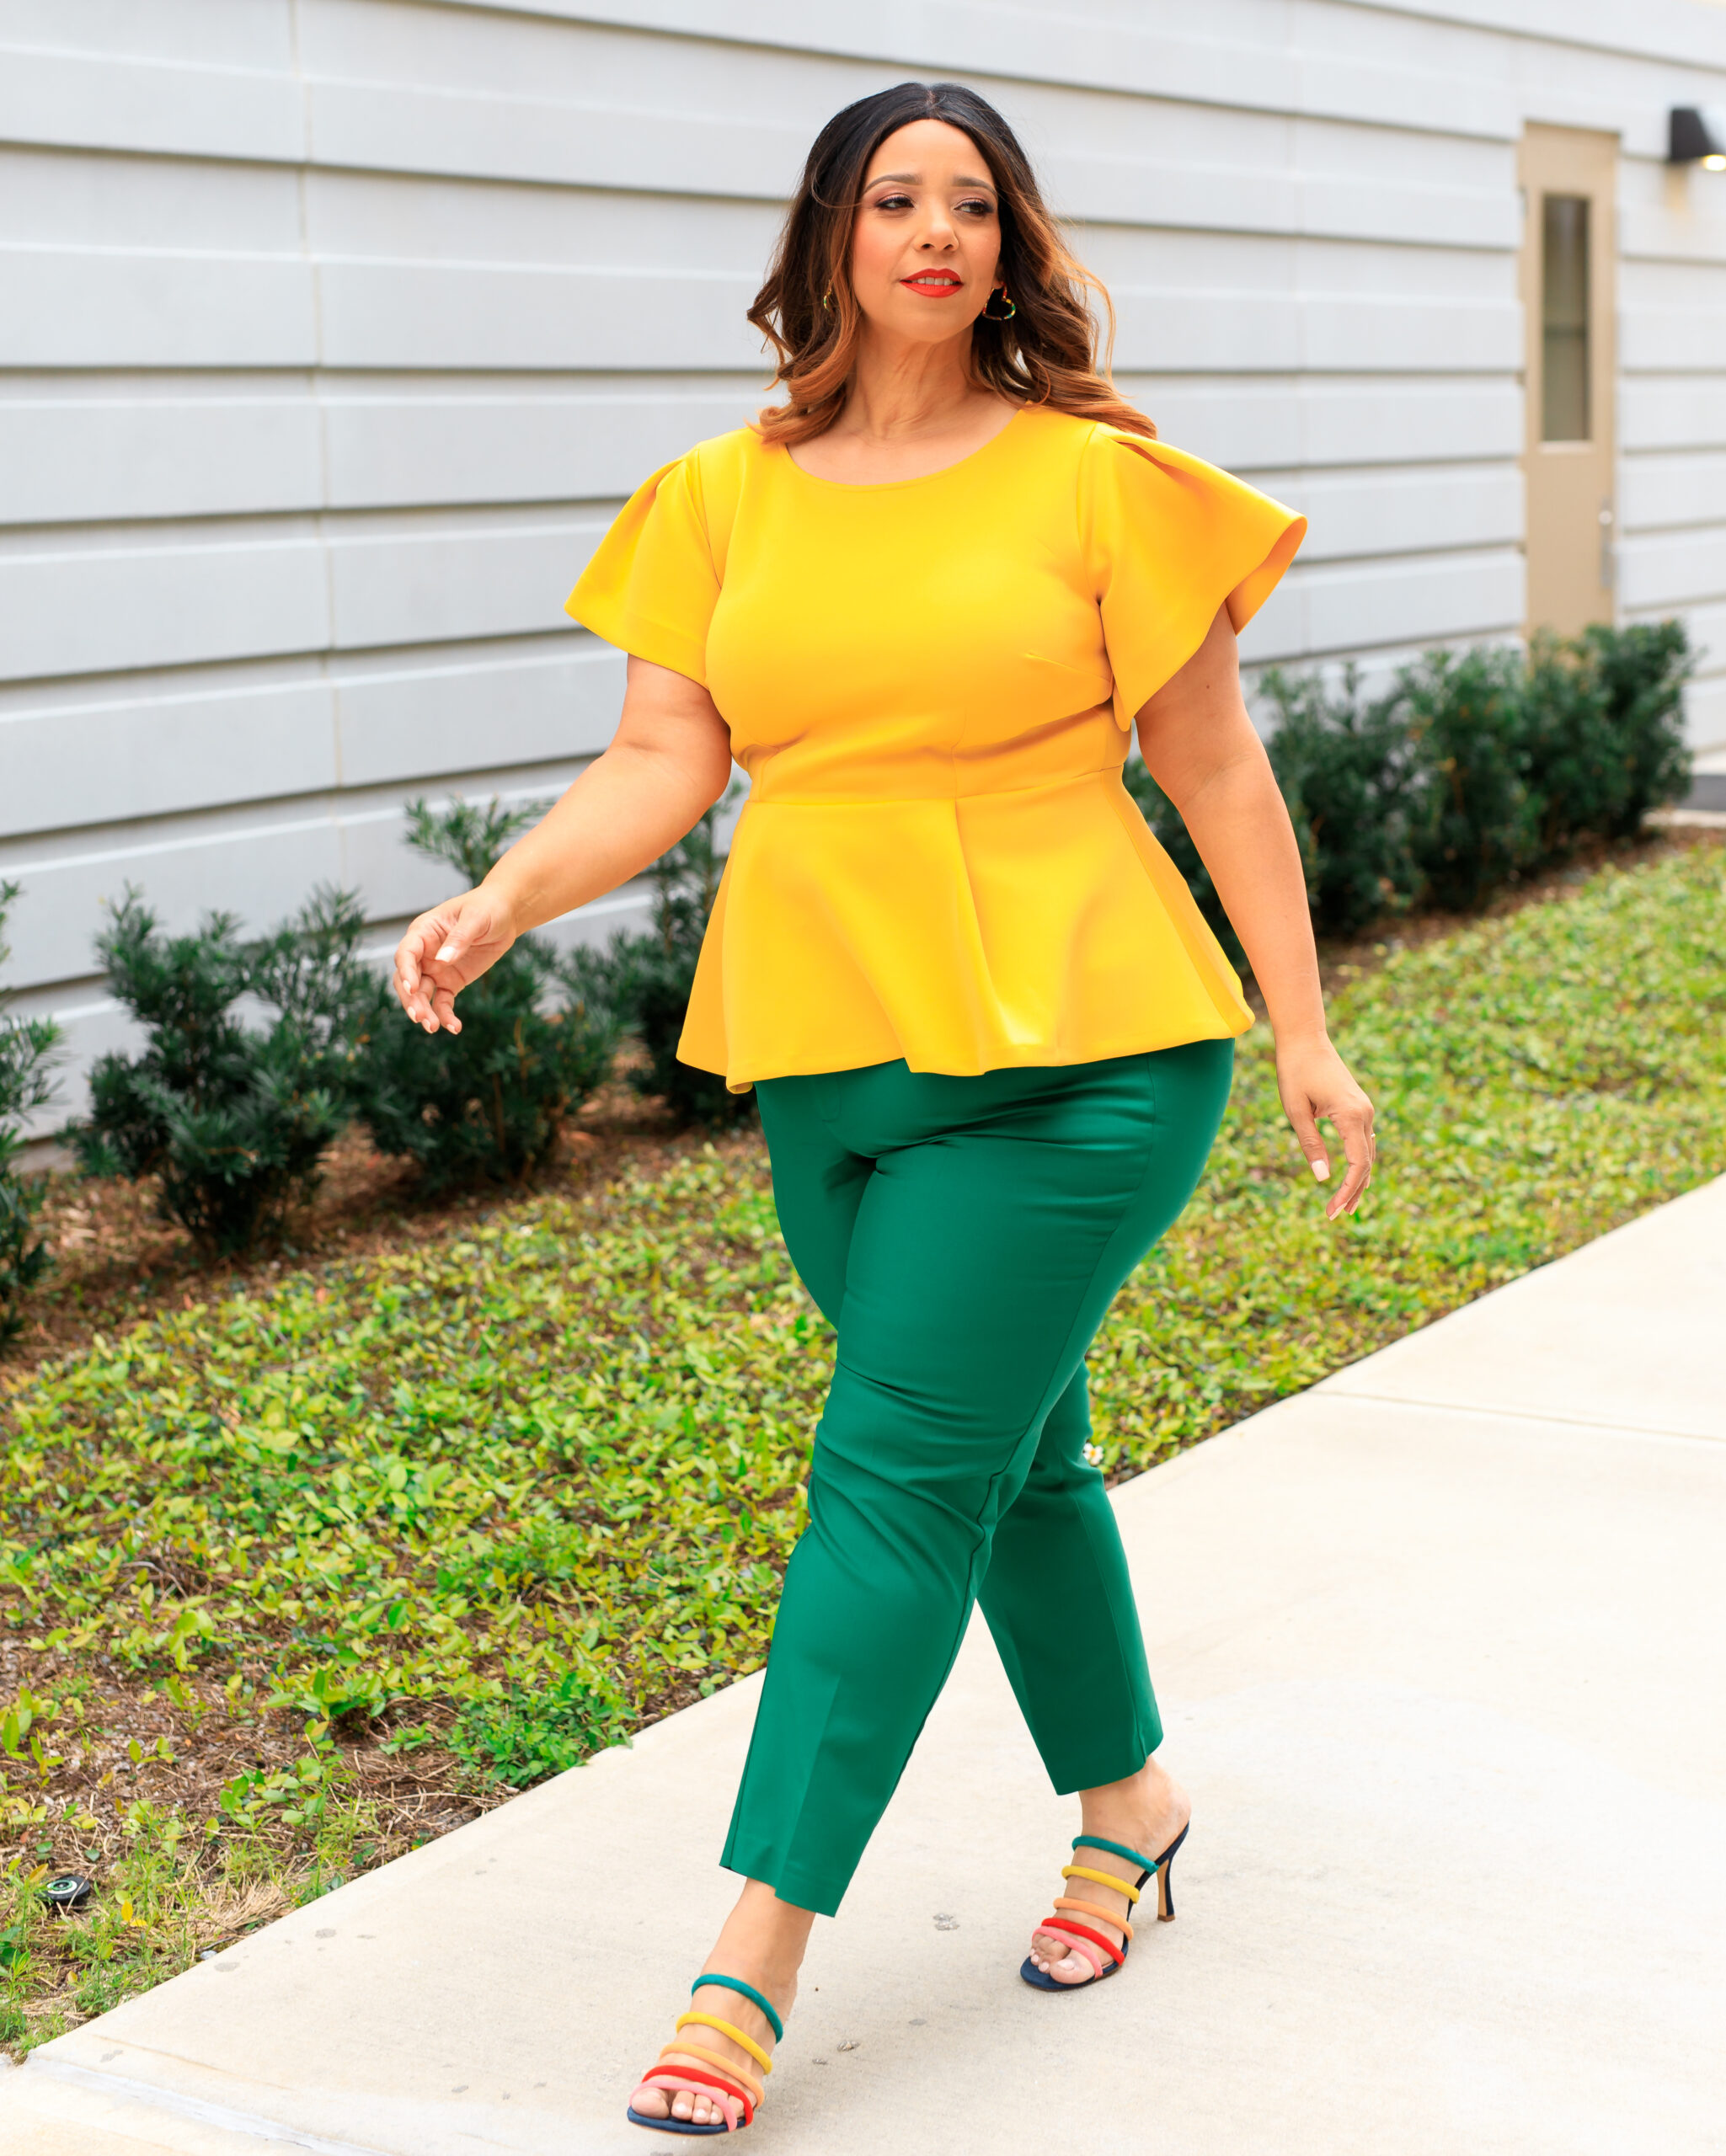 Green-Yellow Dress Outfits (272 ideas & outfits) | Lookastic